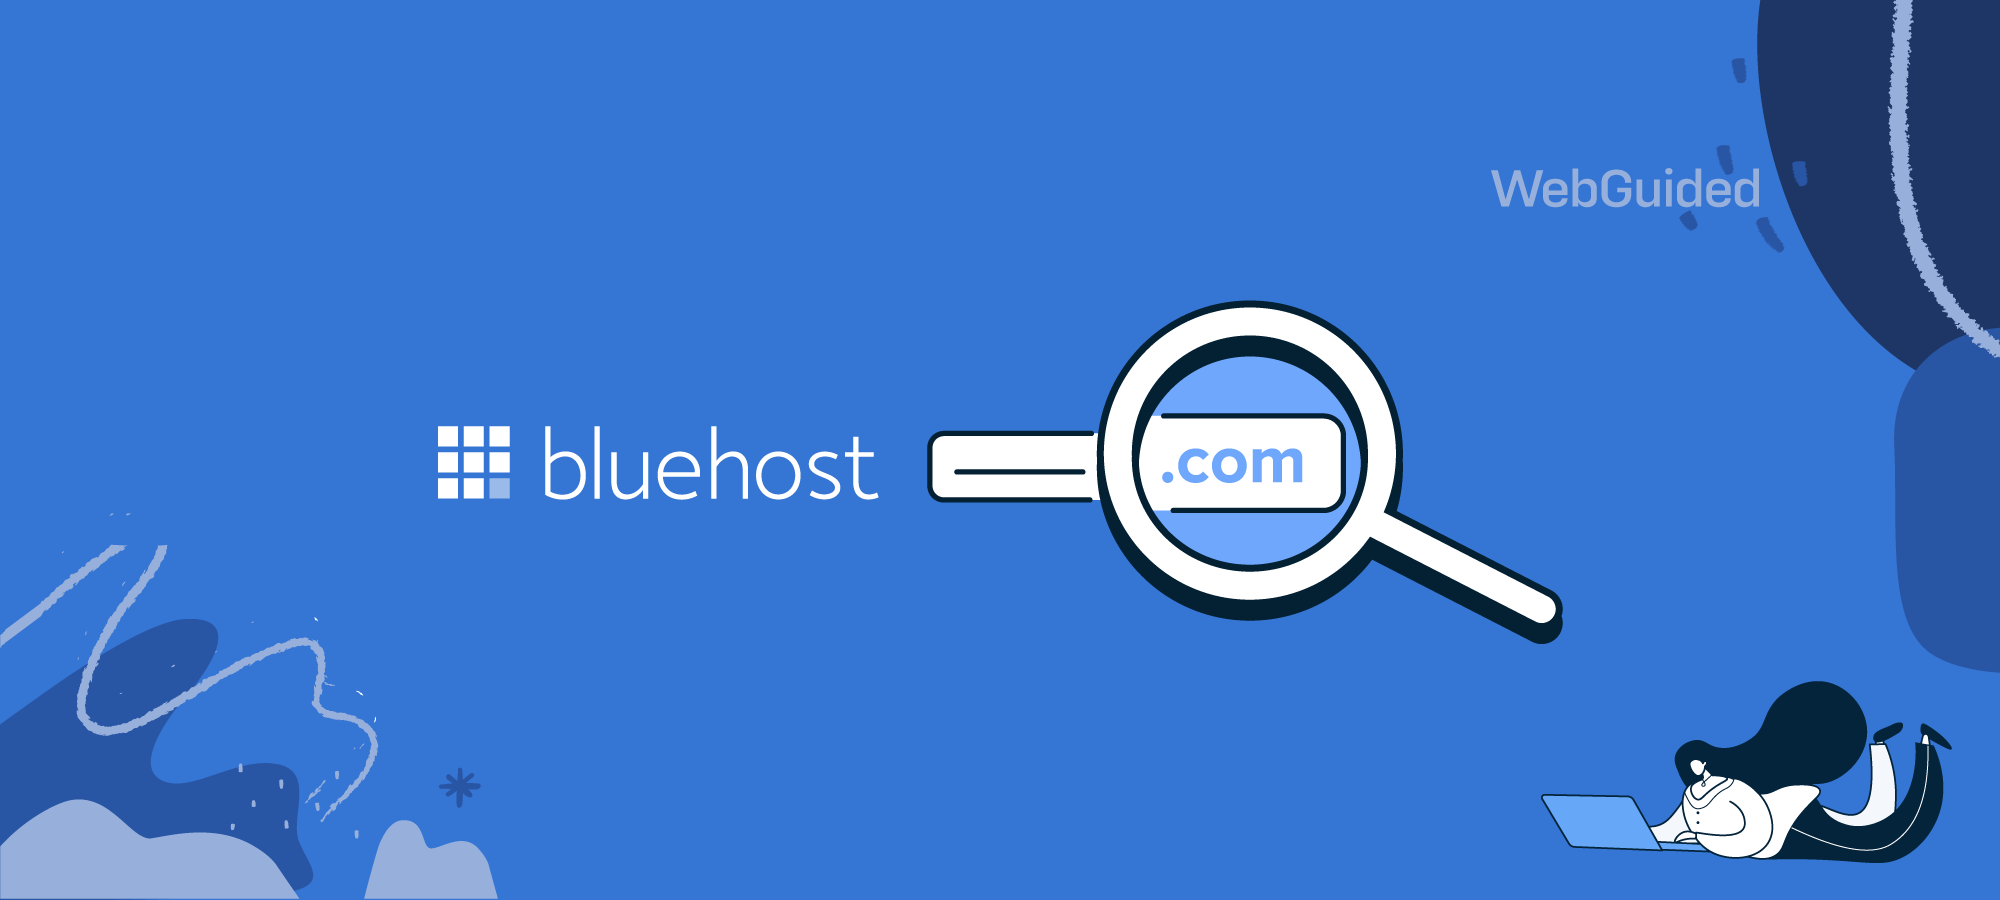 Bluehost Free Domain Name Deal